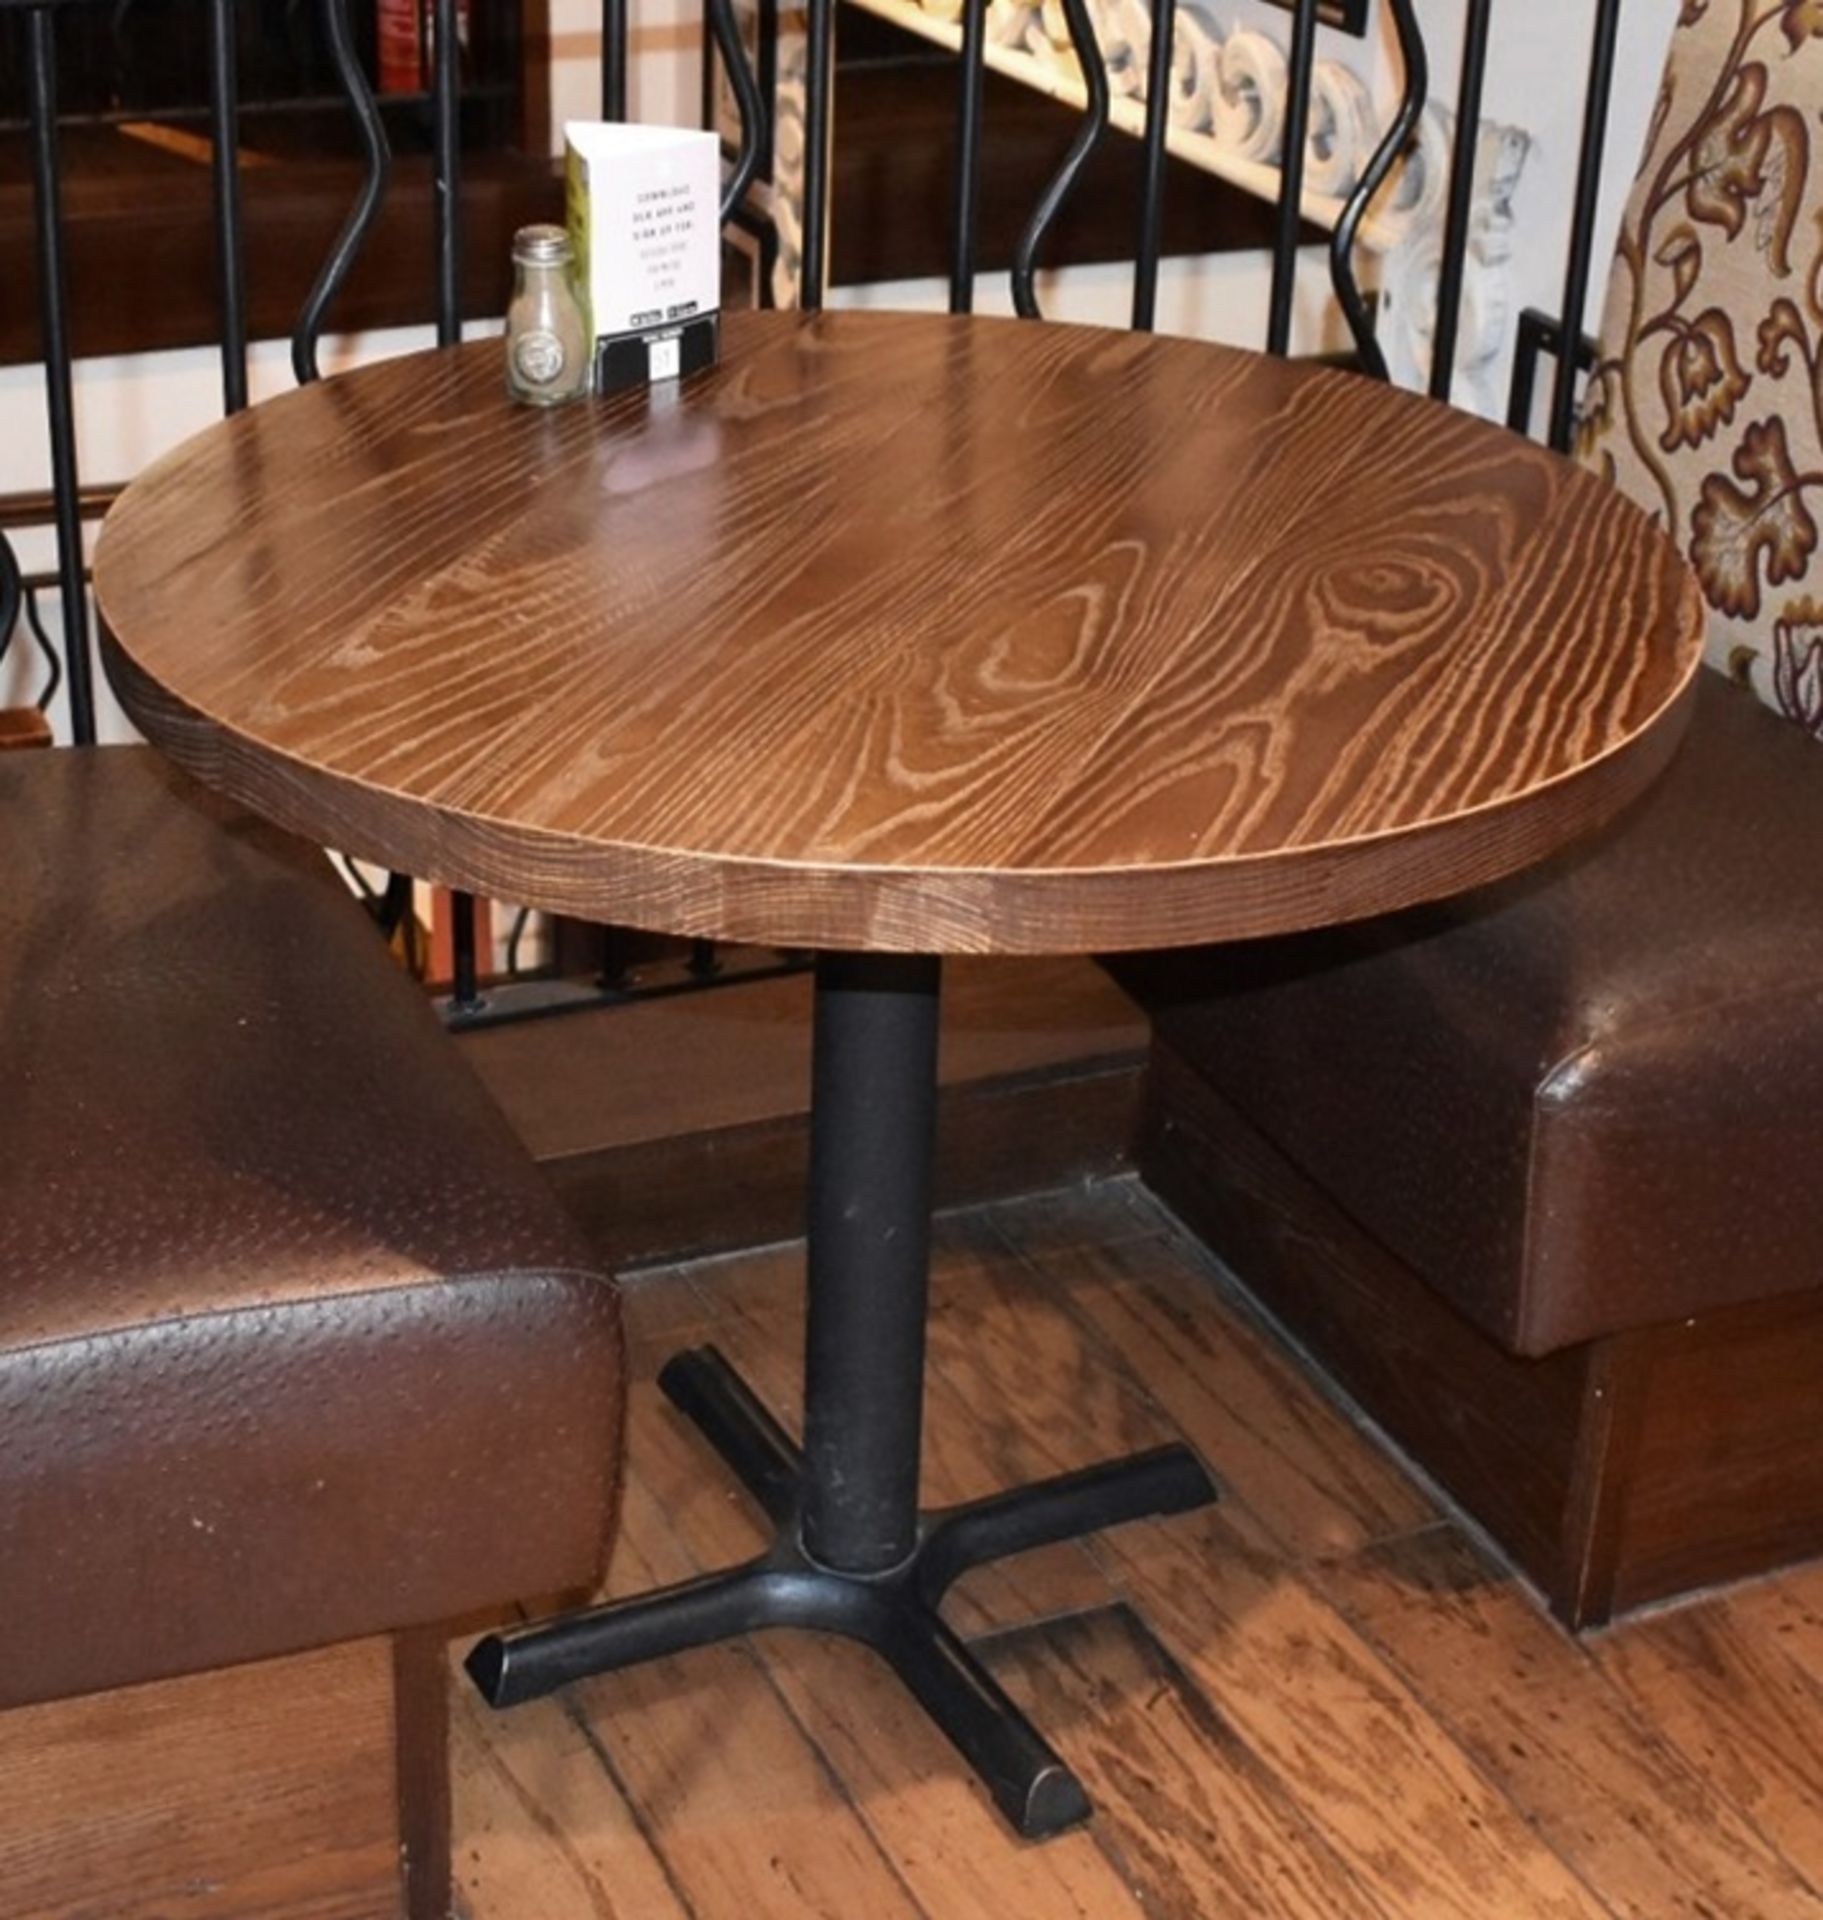 3 x Restaurant 2-Seater Round Table With Medium Ash Tops And Cast Iron Bases